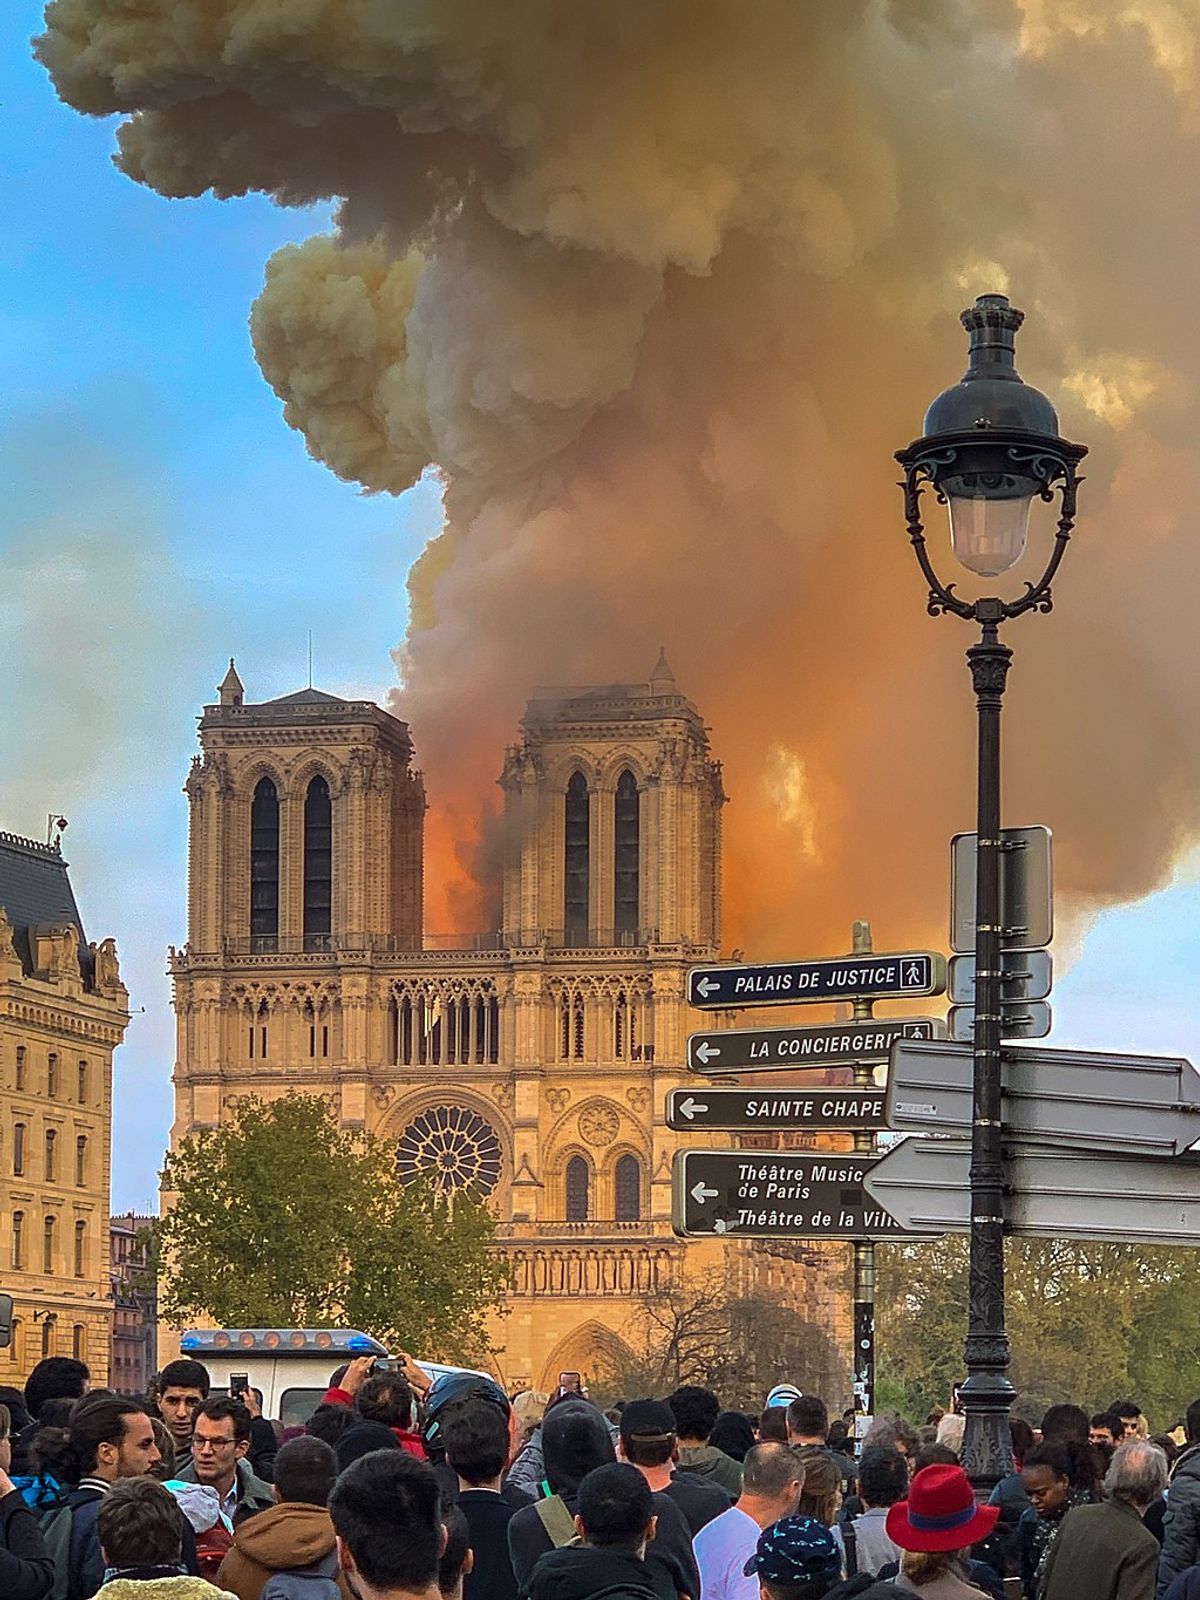 After the Notre Dame fire on 15 April, billionaires and businesses lined up to back the rebuilding campaign Photo: Milliped via Wikicommons